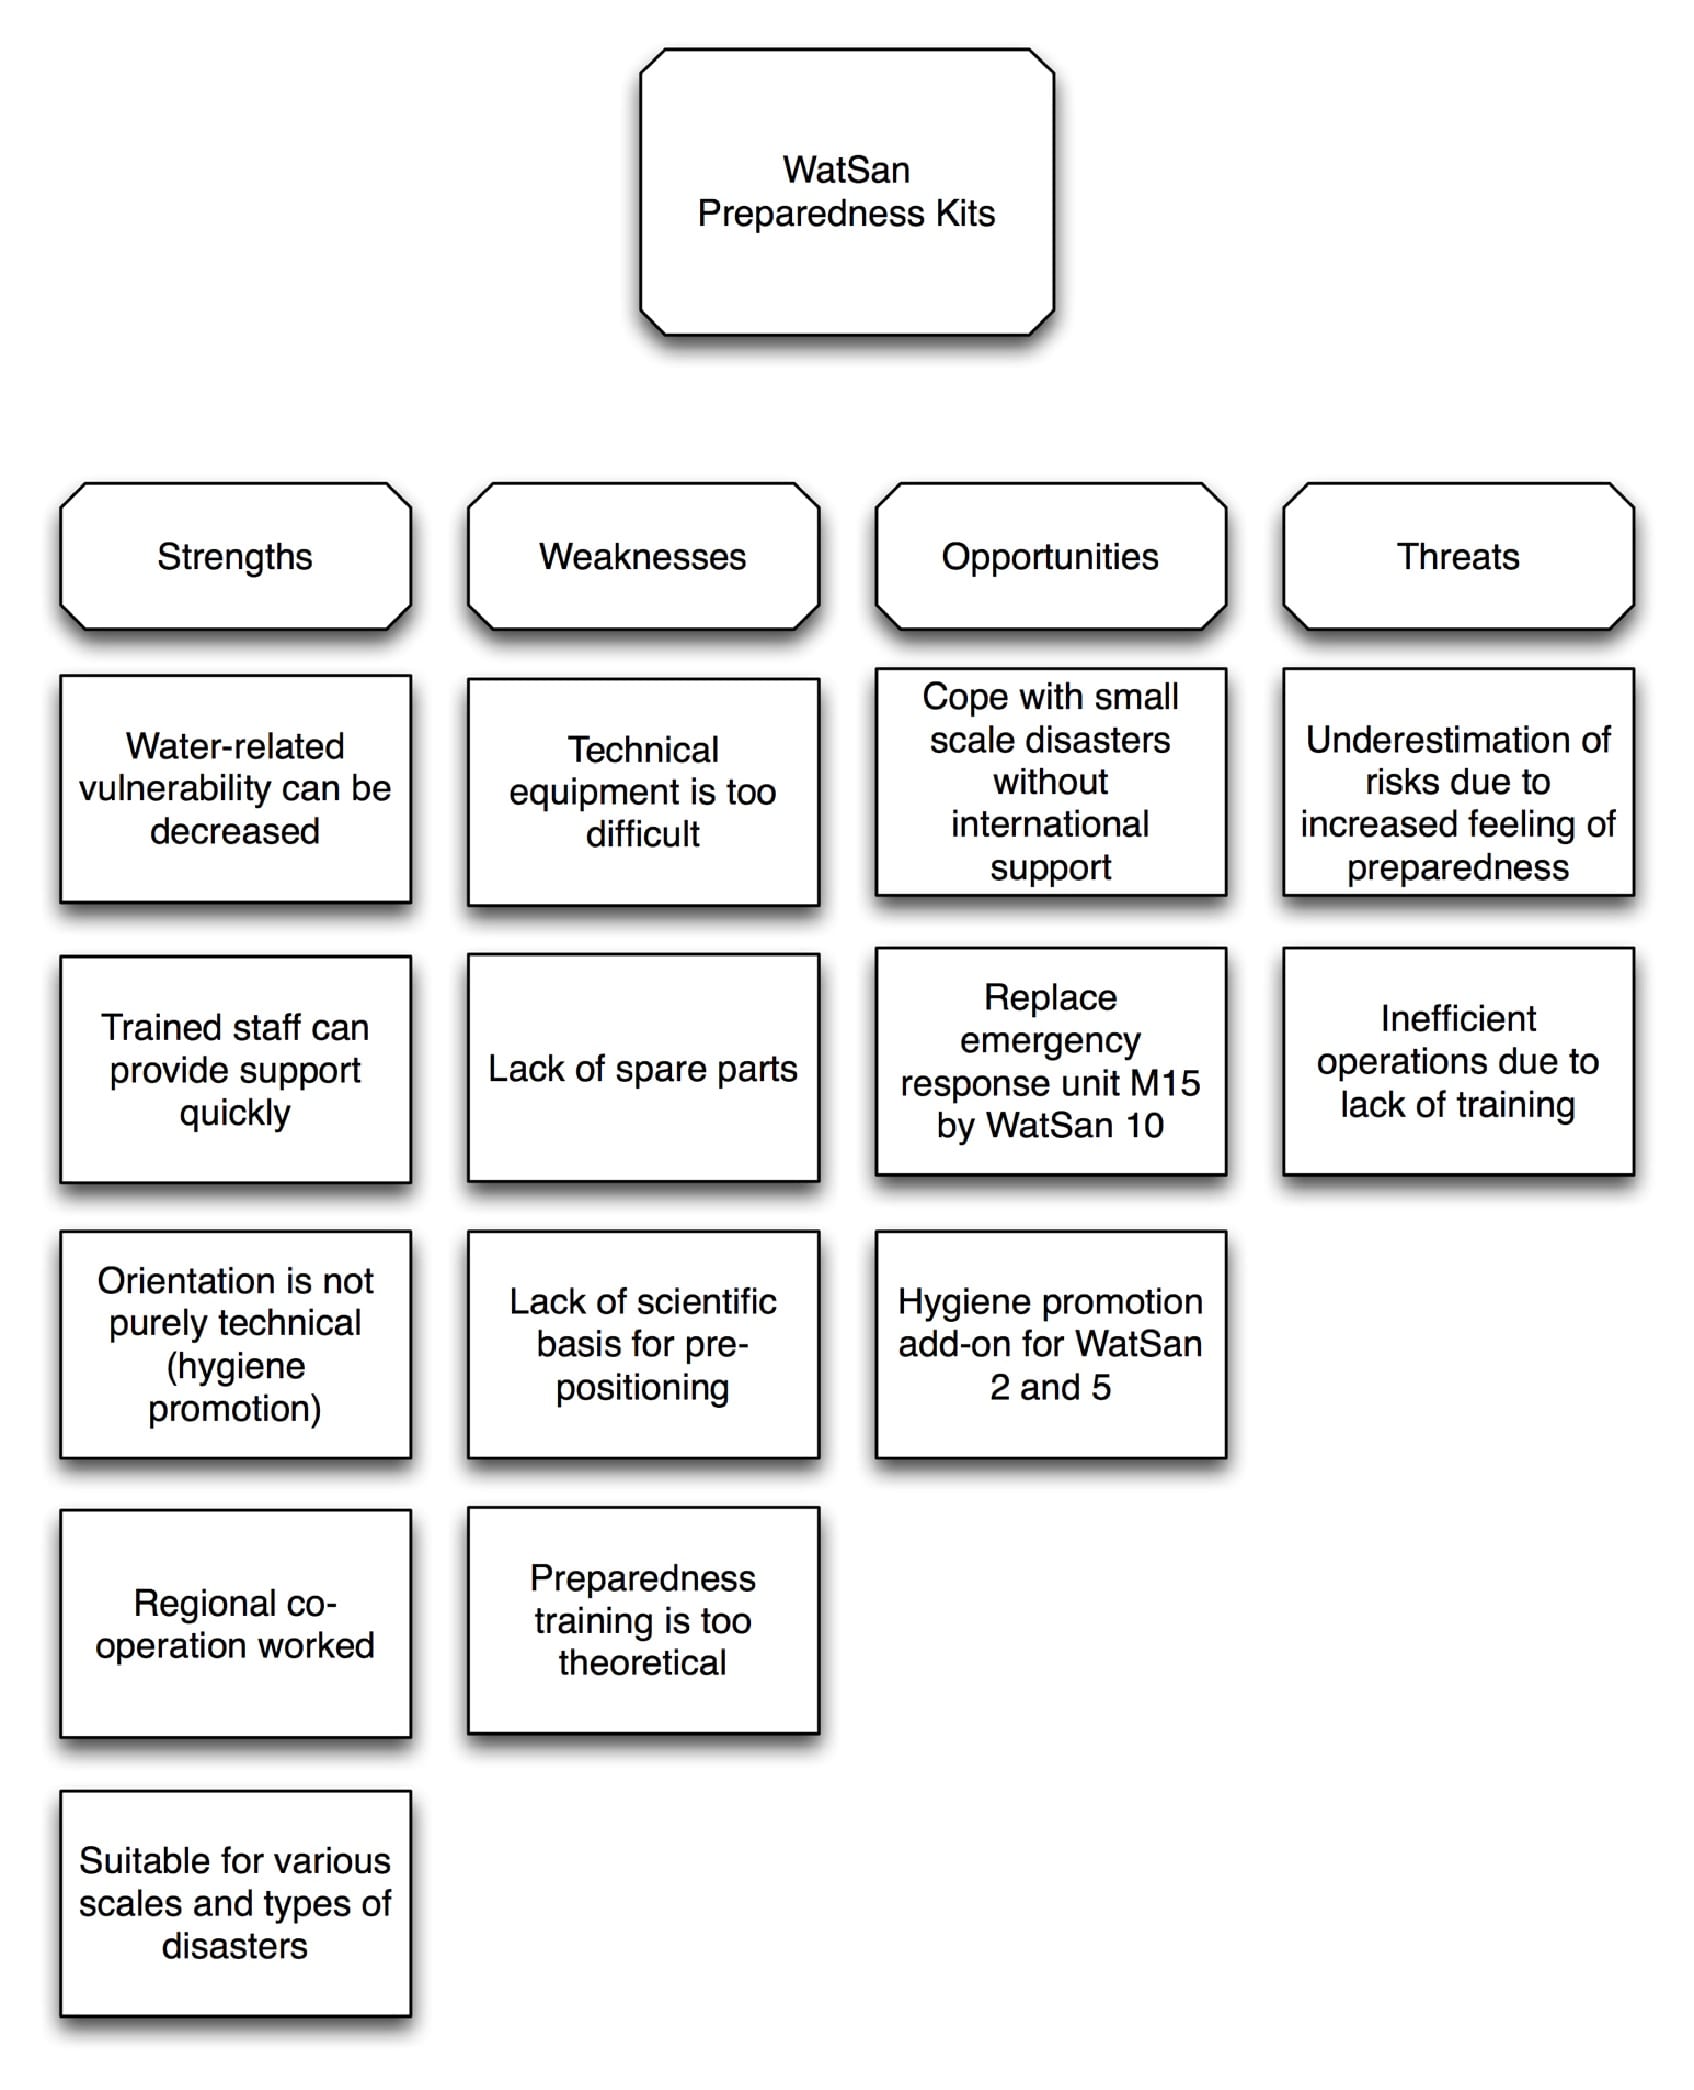 Figure showing a SWOT-Analysis of the results of a questionnaire and expert interviews